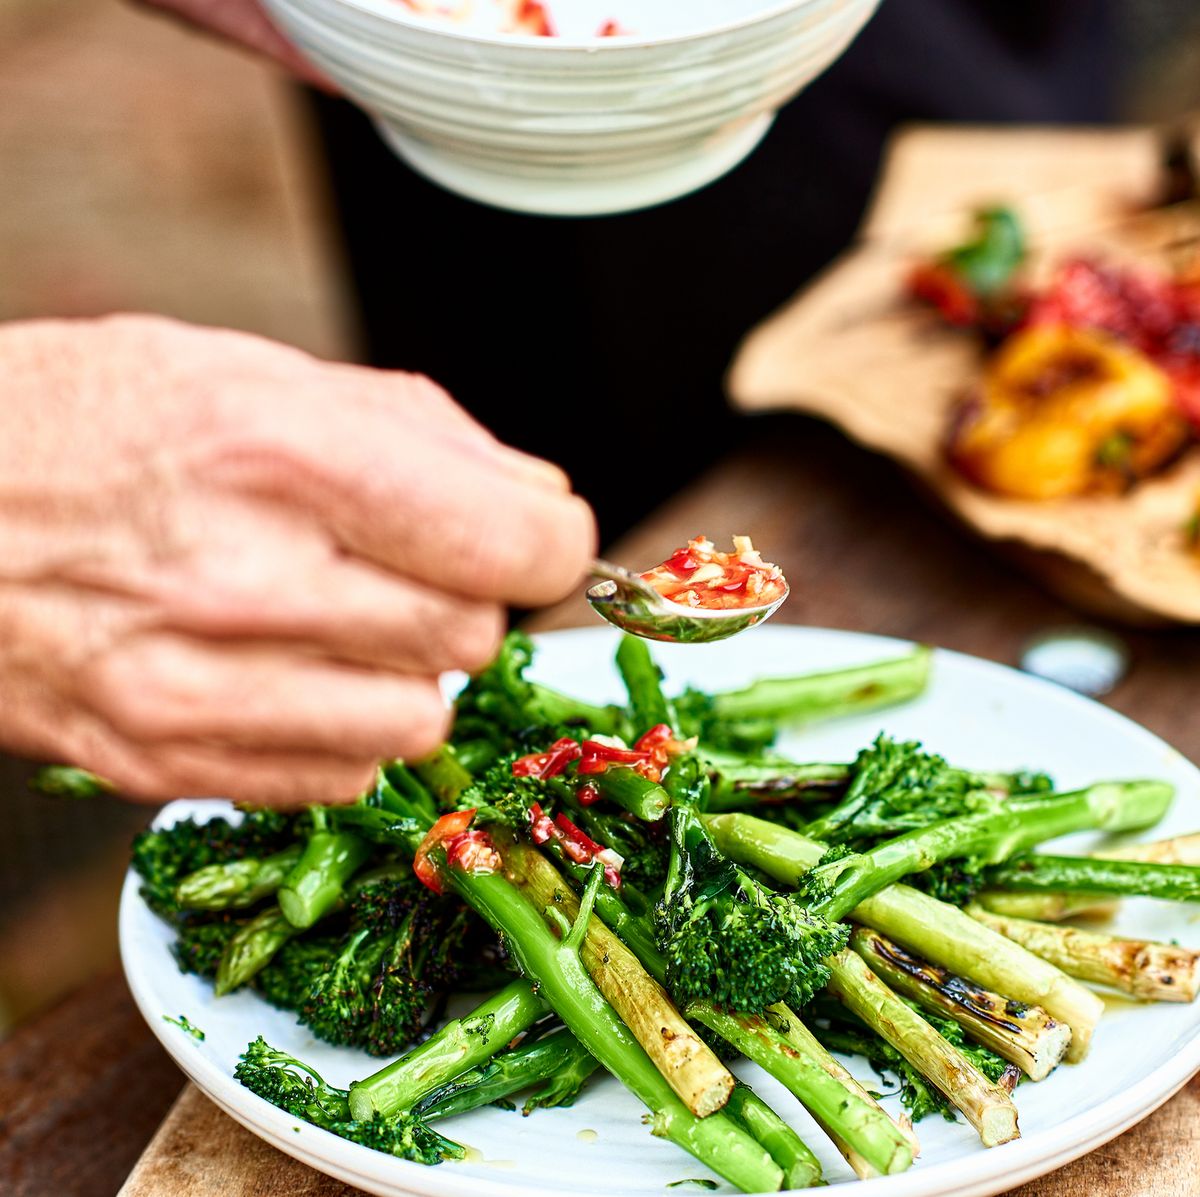 dish with fresh green tenderstem brococli and asparagus and red chilli dressing, serving, plating up, food preparation, healthy eating